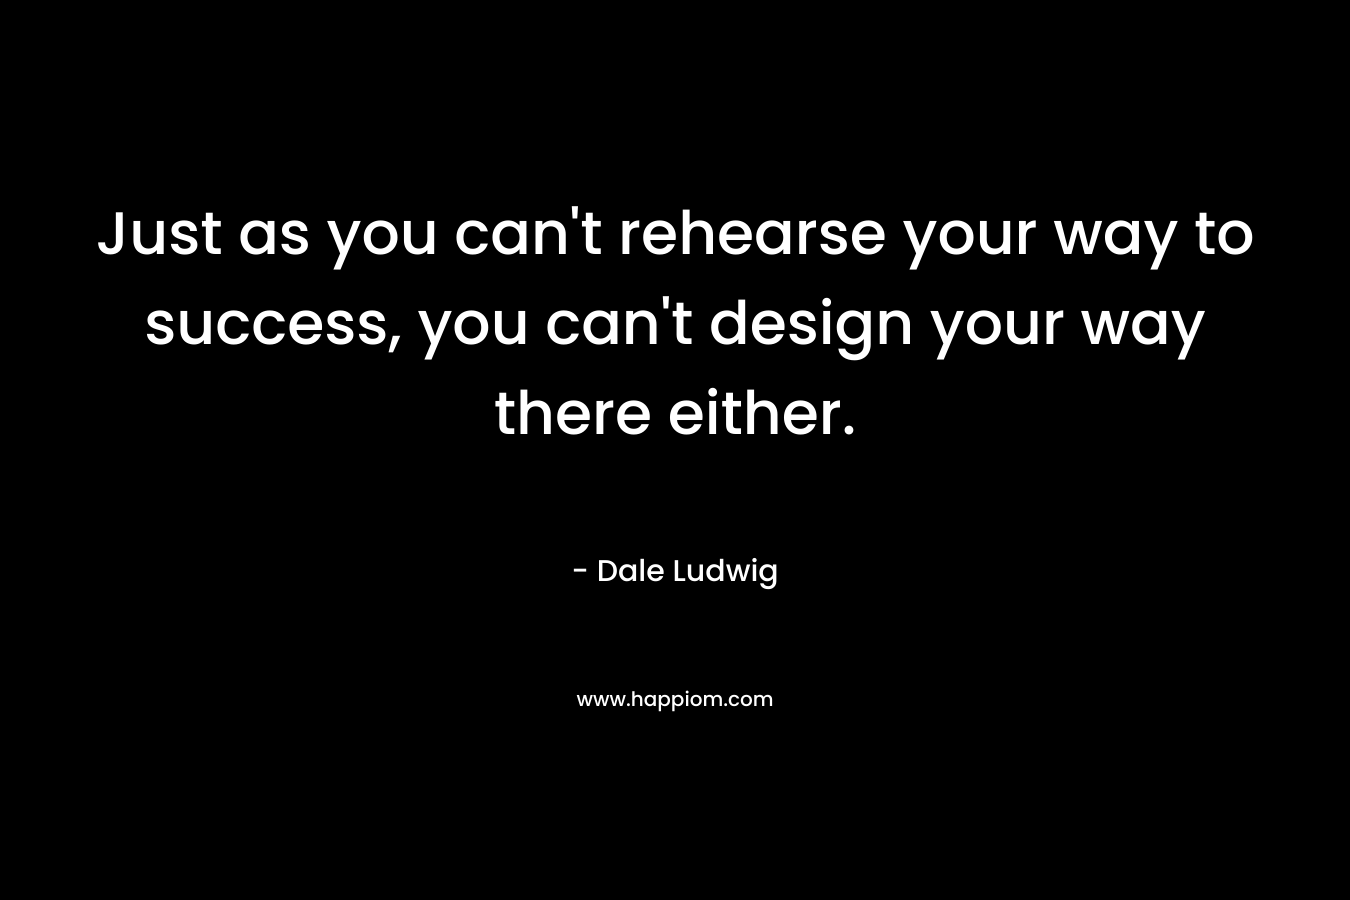 Just as you can't rehearse your way to success, you can't design your way there either.